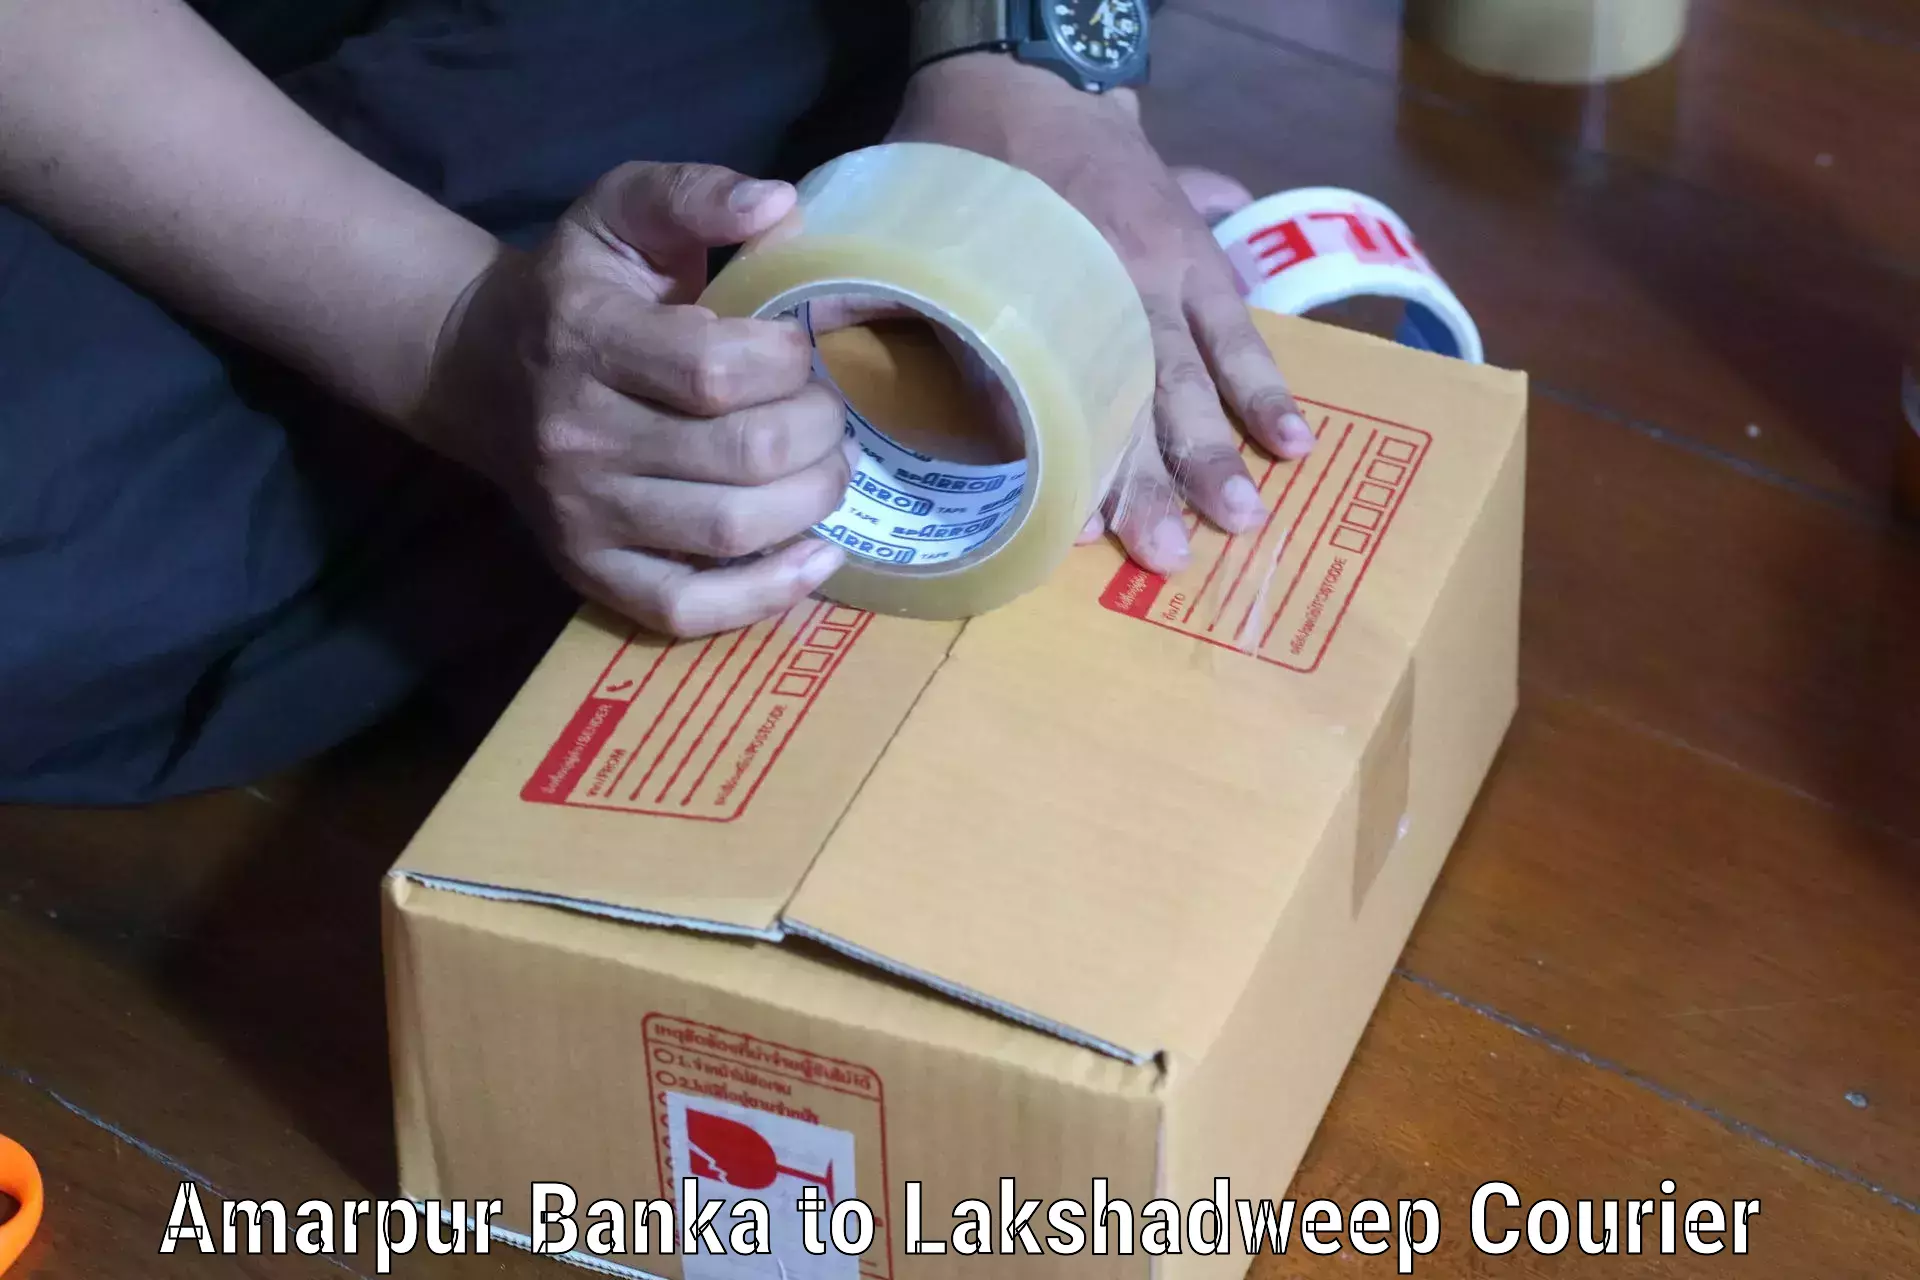 Sustainable courier practices Amarpur Banka to Lakshadweep